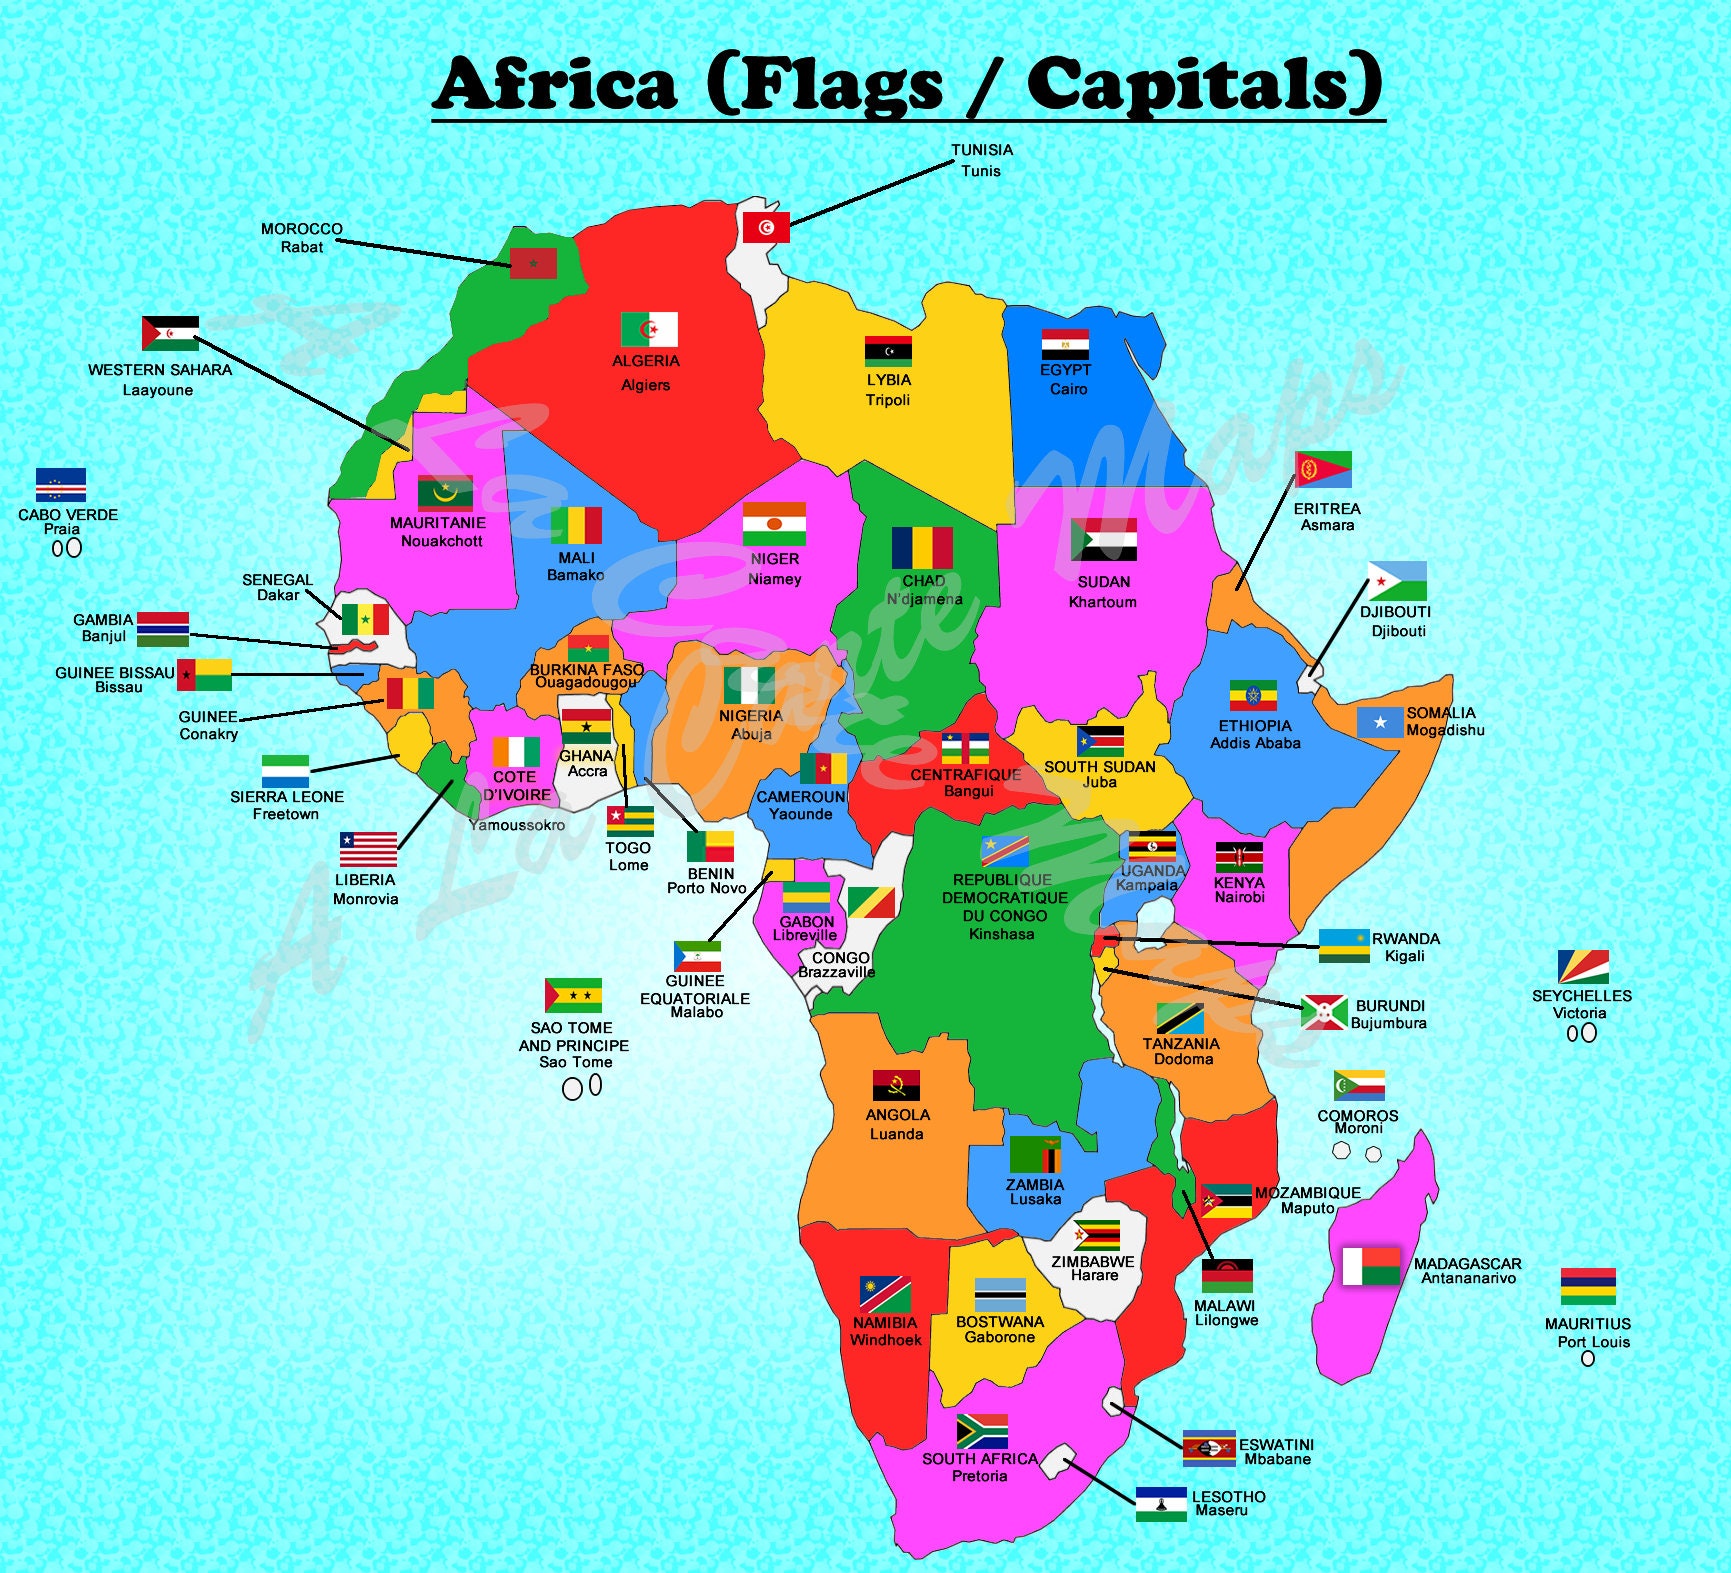 South Africa, History, Capital, Flag, Map, Population, & Facts